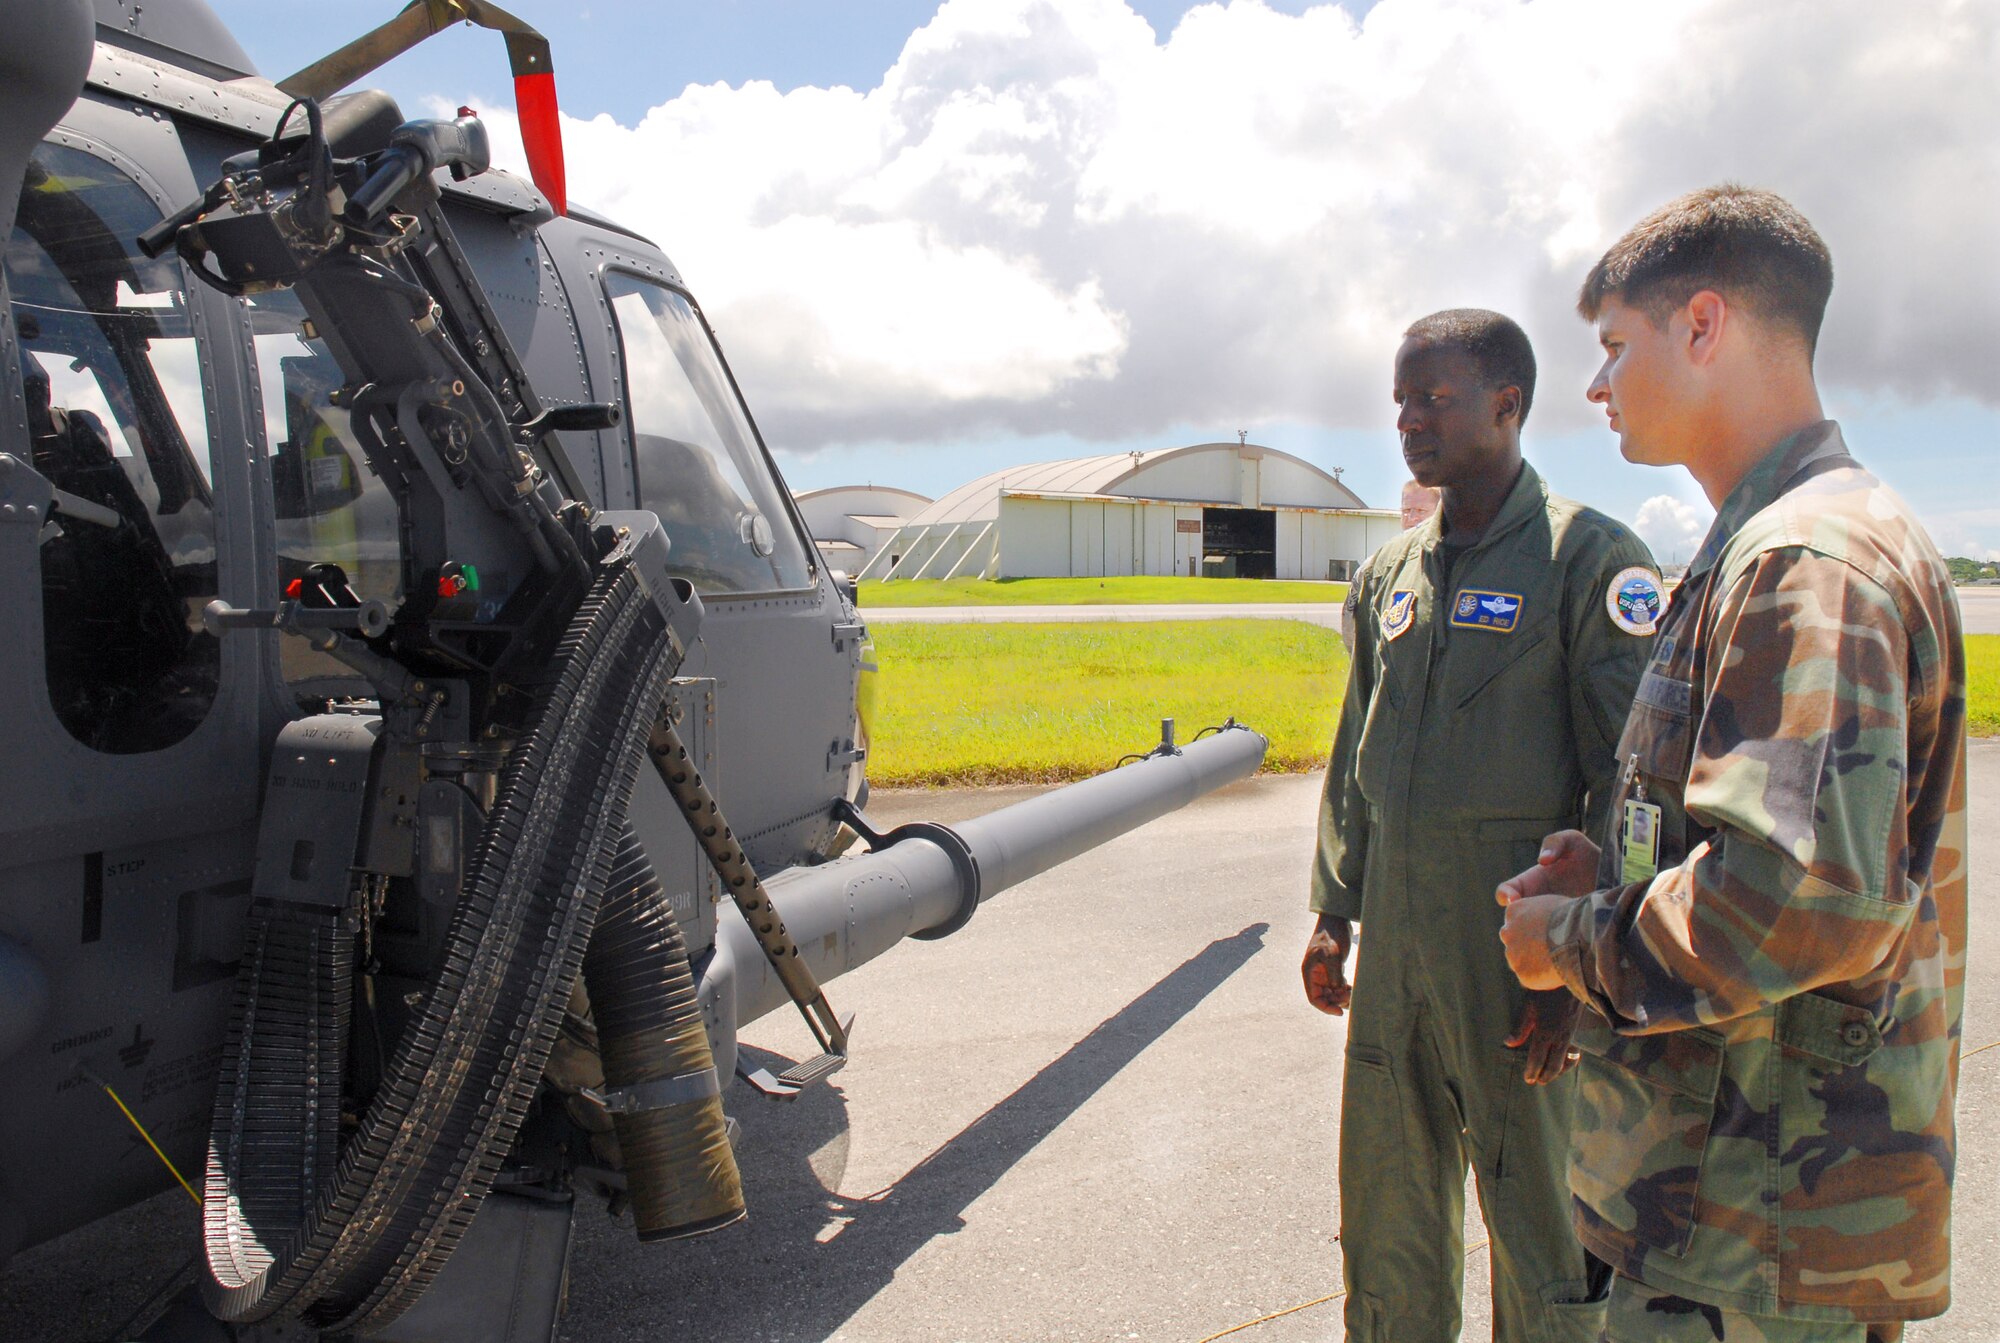 Lt. Gen. Edward A. Rice Jr. discusses the capabilities of the HH-60 Pave Hawk helicopter with Capt. Gerard Carisio during a June 20 tour of Kadena Air Base, Japan. General Rice is the commander of U.S. Forces Japan and 5th Air Force. Captain Carisio is the 33rd Aircraft Maintenance Unit officer in charge. (U.S. Air Force photo/Airman Chad Warren) 
